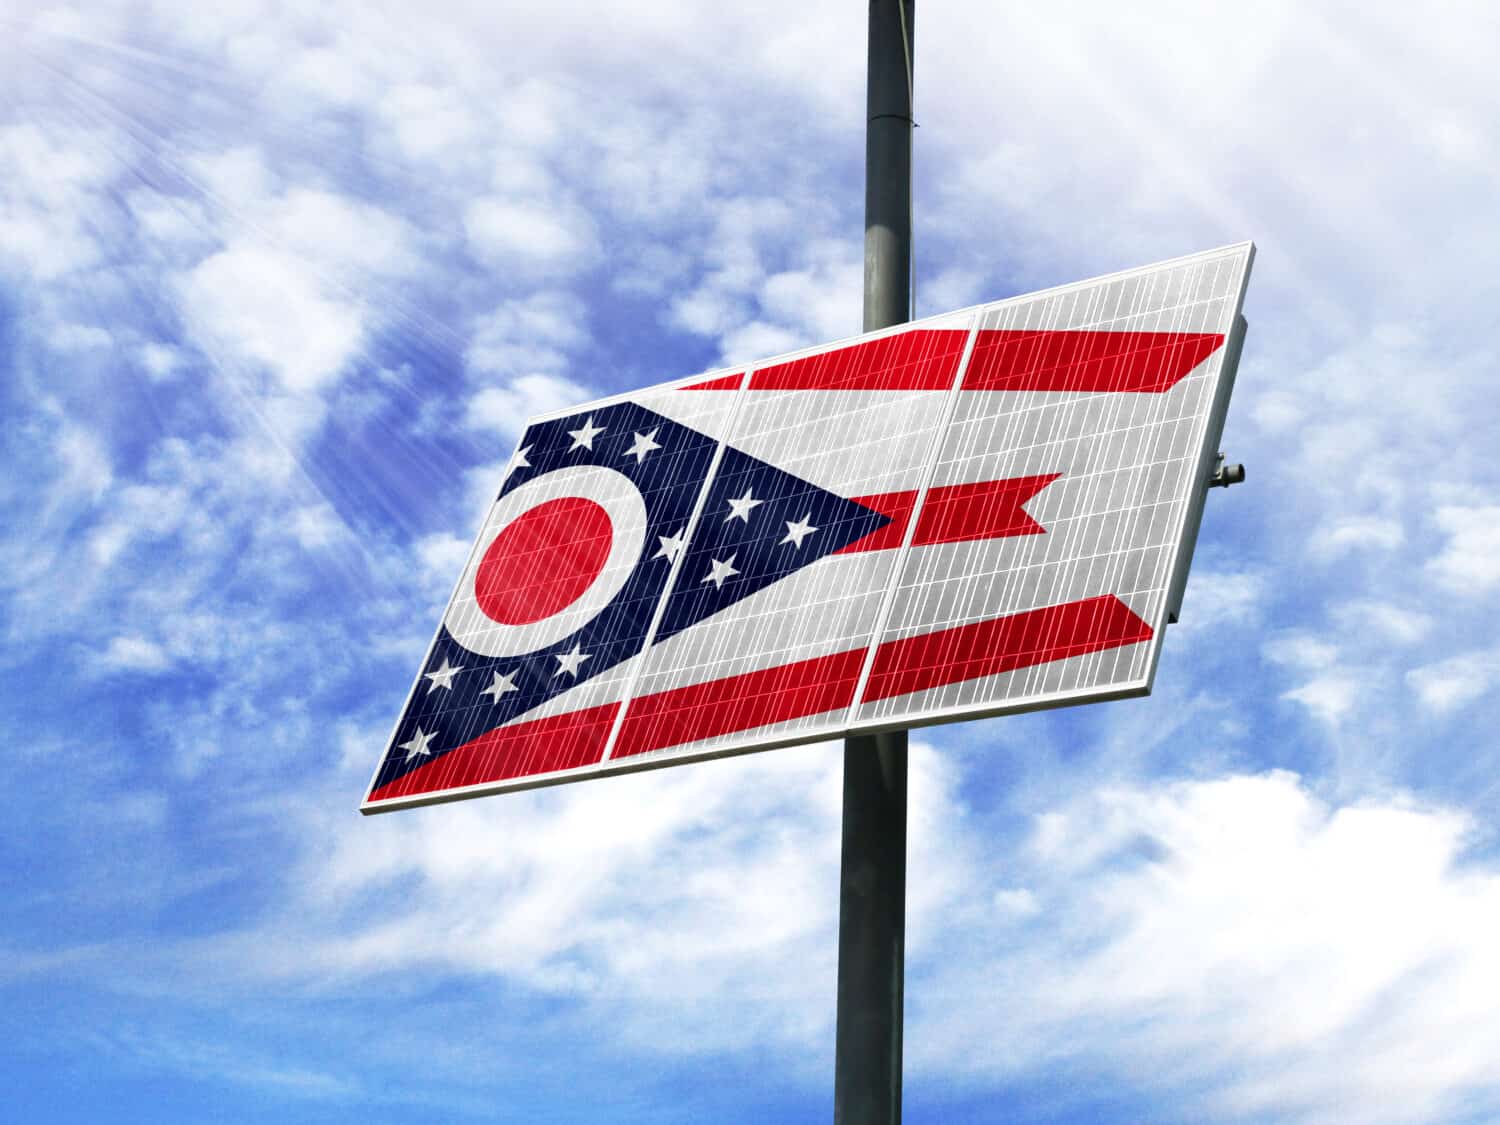 Solar panels against a blue sky with a picture of the flag State of Ohio